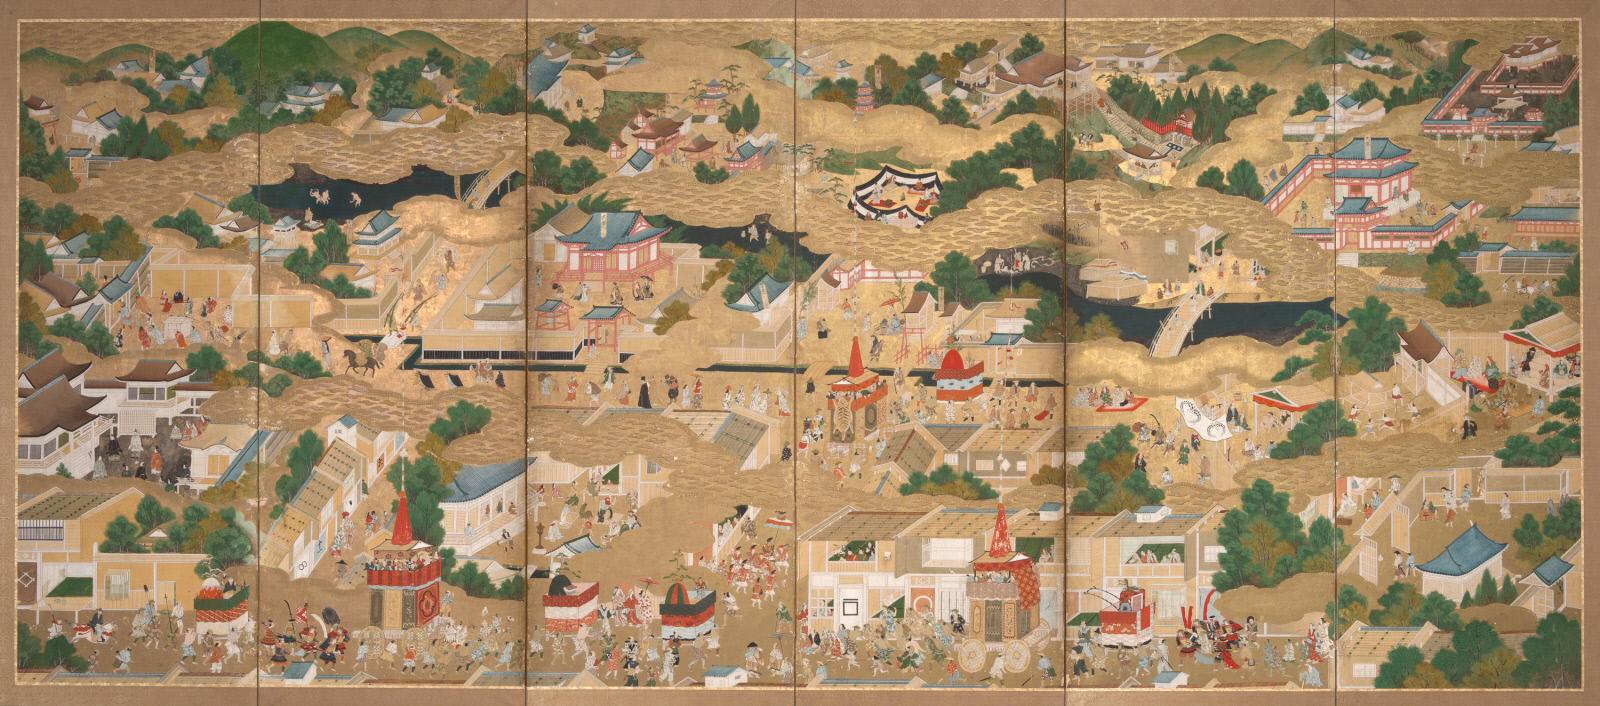 Image Credit: Scenes in and Around Kyoto (Rakuchu Rakugai-zu). Japan, mid-17th century. Ink, pigments, and gold leaf on paper. h. 66 in. (167.6 cm); w. 144 in. (365.8 cm). Purchased with funds provided by the Lillie and Roy Cullen Endowment, 2001.51.